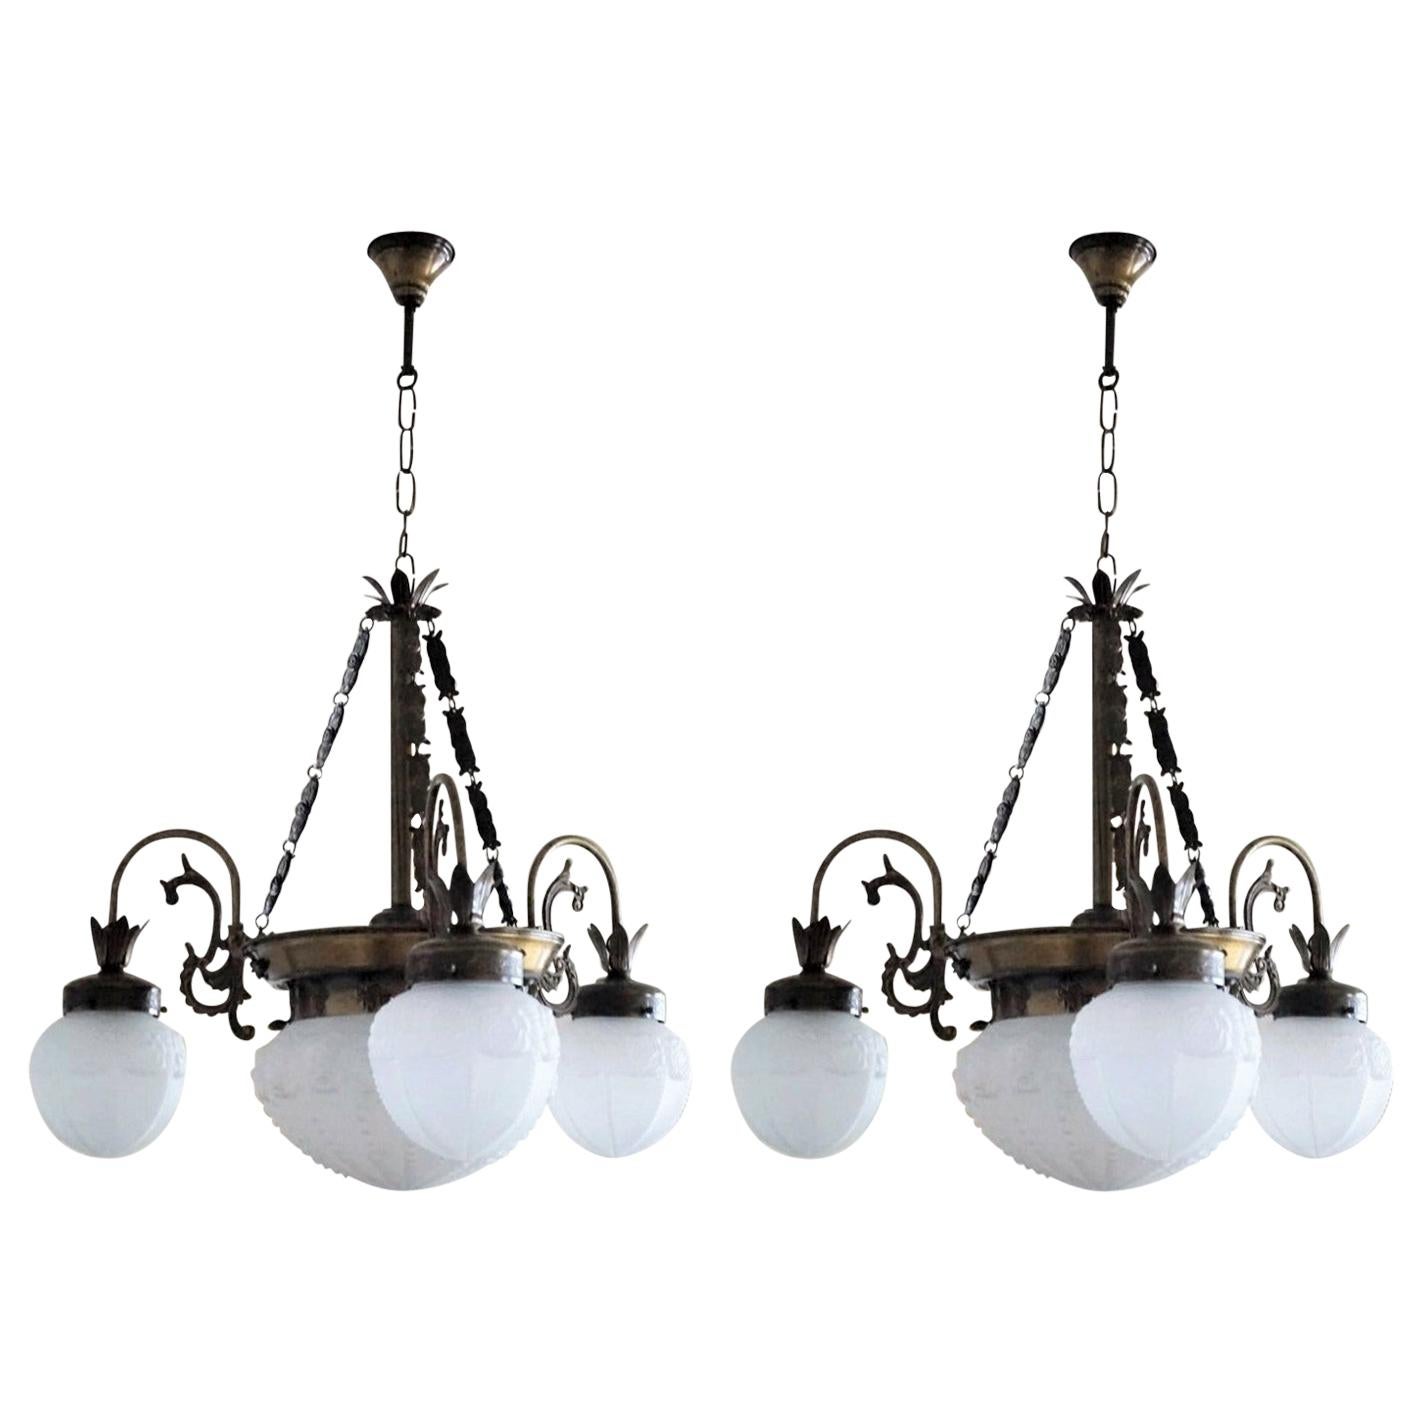 Pair of French Art Deco Brass Frosted Glass in High Relief Four-Light Chandelier